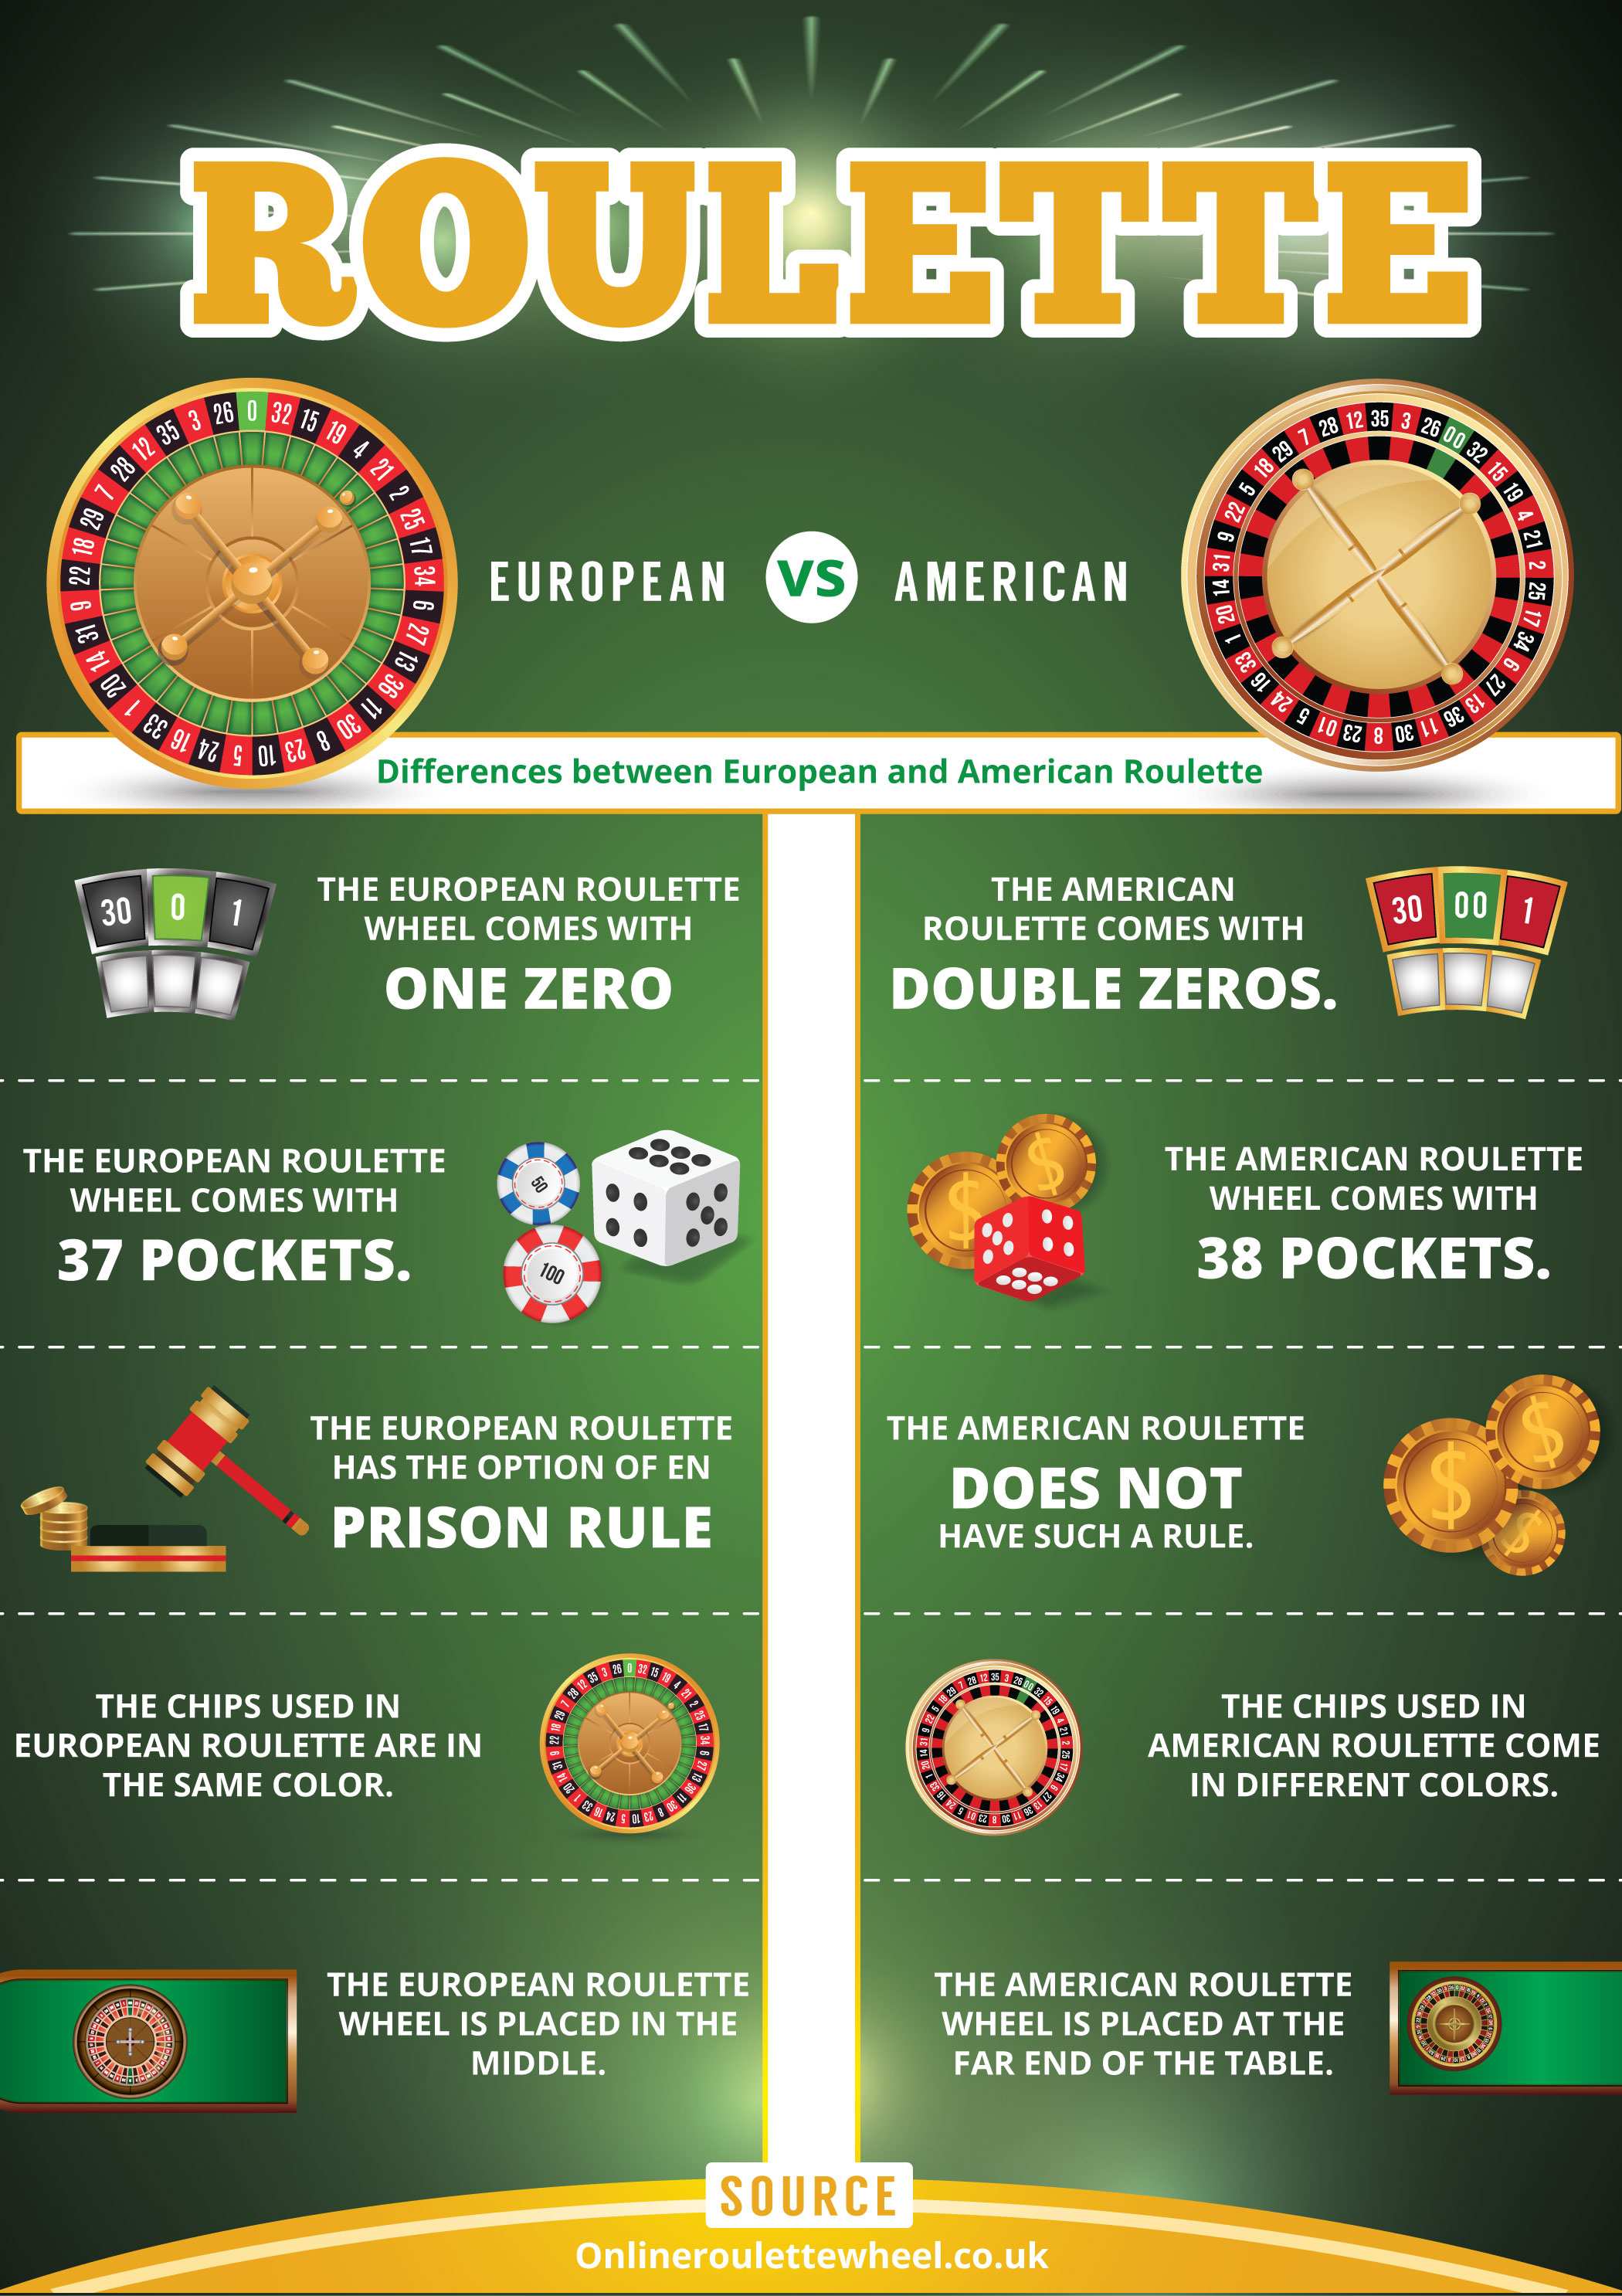 Differences Between European and American Roulette